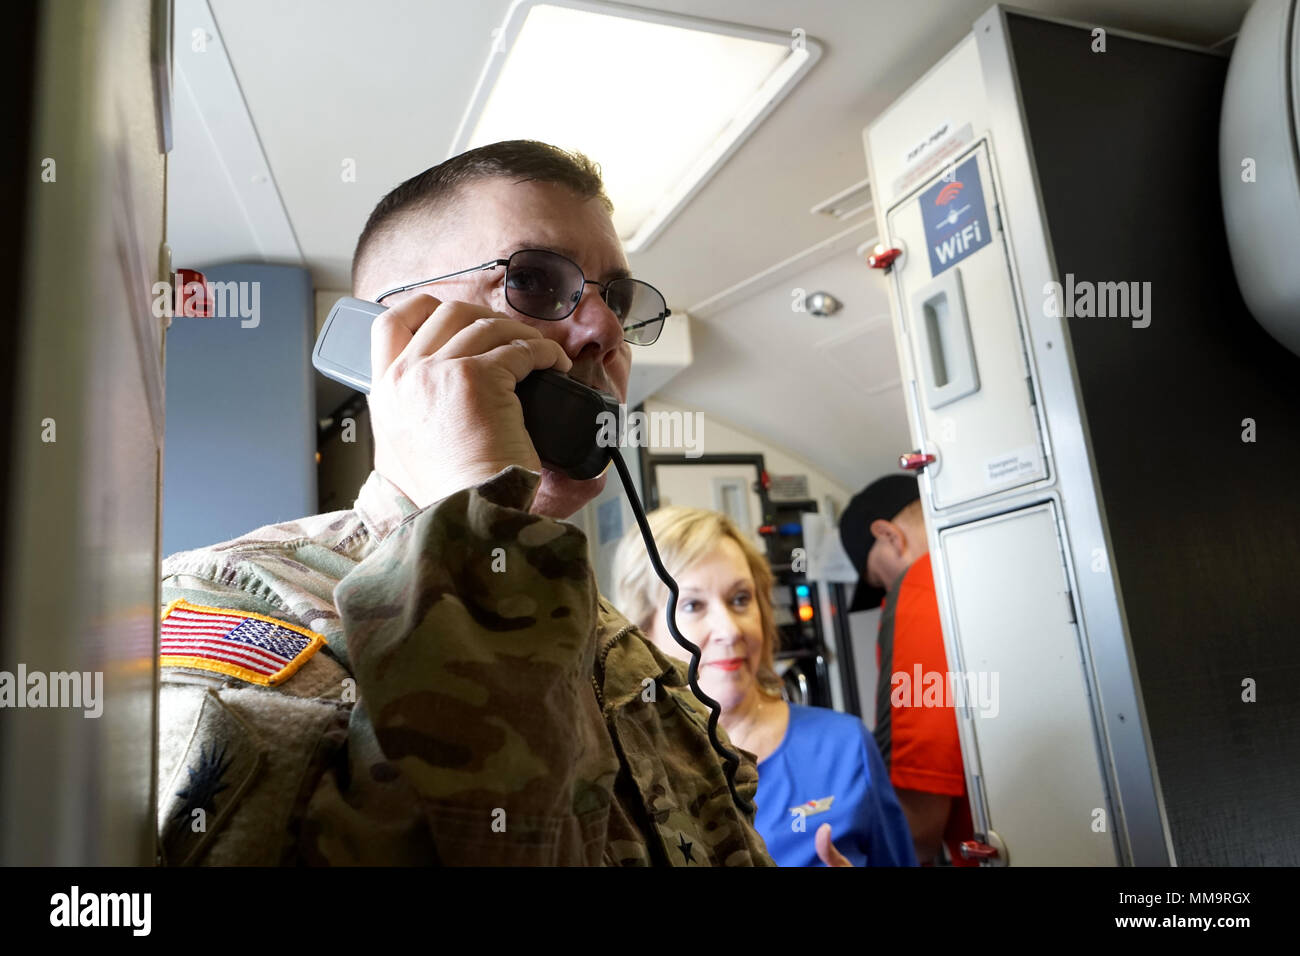 Brig. Gen. John W. Lathrop uses an intercom to share a motivational message with CalGuard Soldiers on a chartered plane at the Joint Force Training Base airfield in Los Alamitos, California, Sept. 18. Lathrop and  nearly 100 Guardsmen from the 40th Infantry Division’s Headquarters were headed to Fort Hood, Texas for the first phase of a yearlong deployment to Afghanistan. Stock Photo